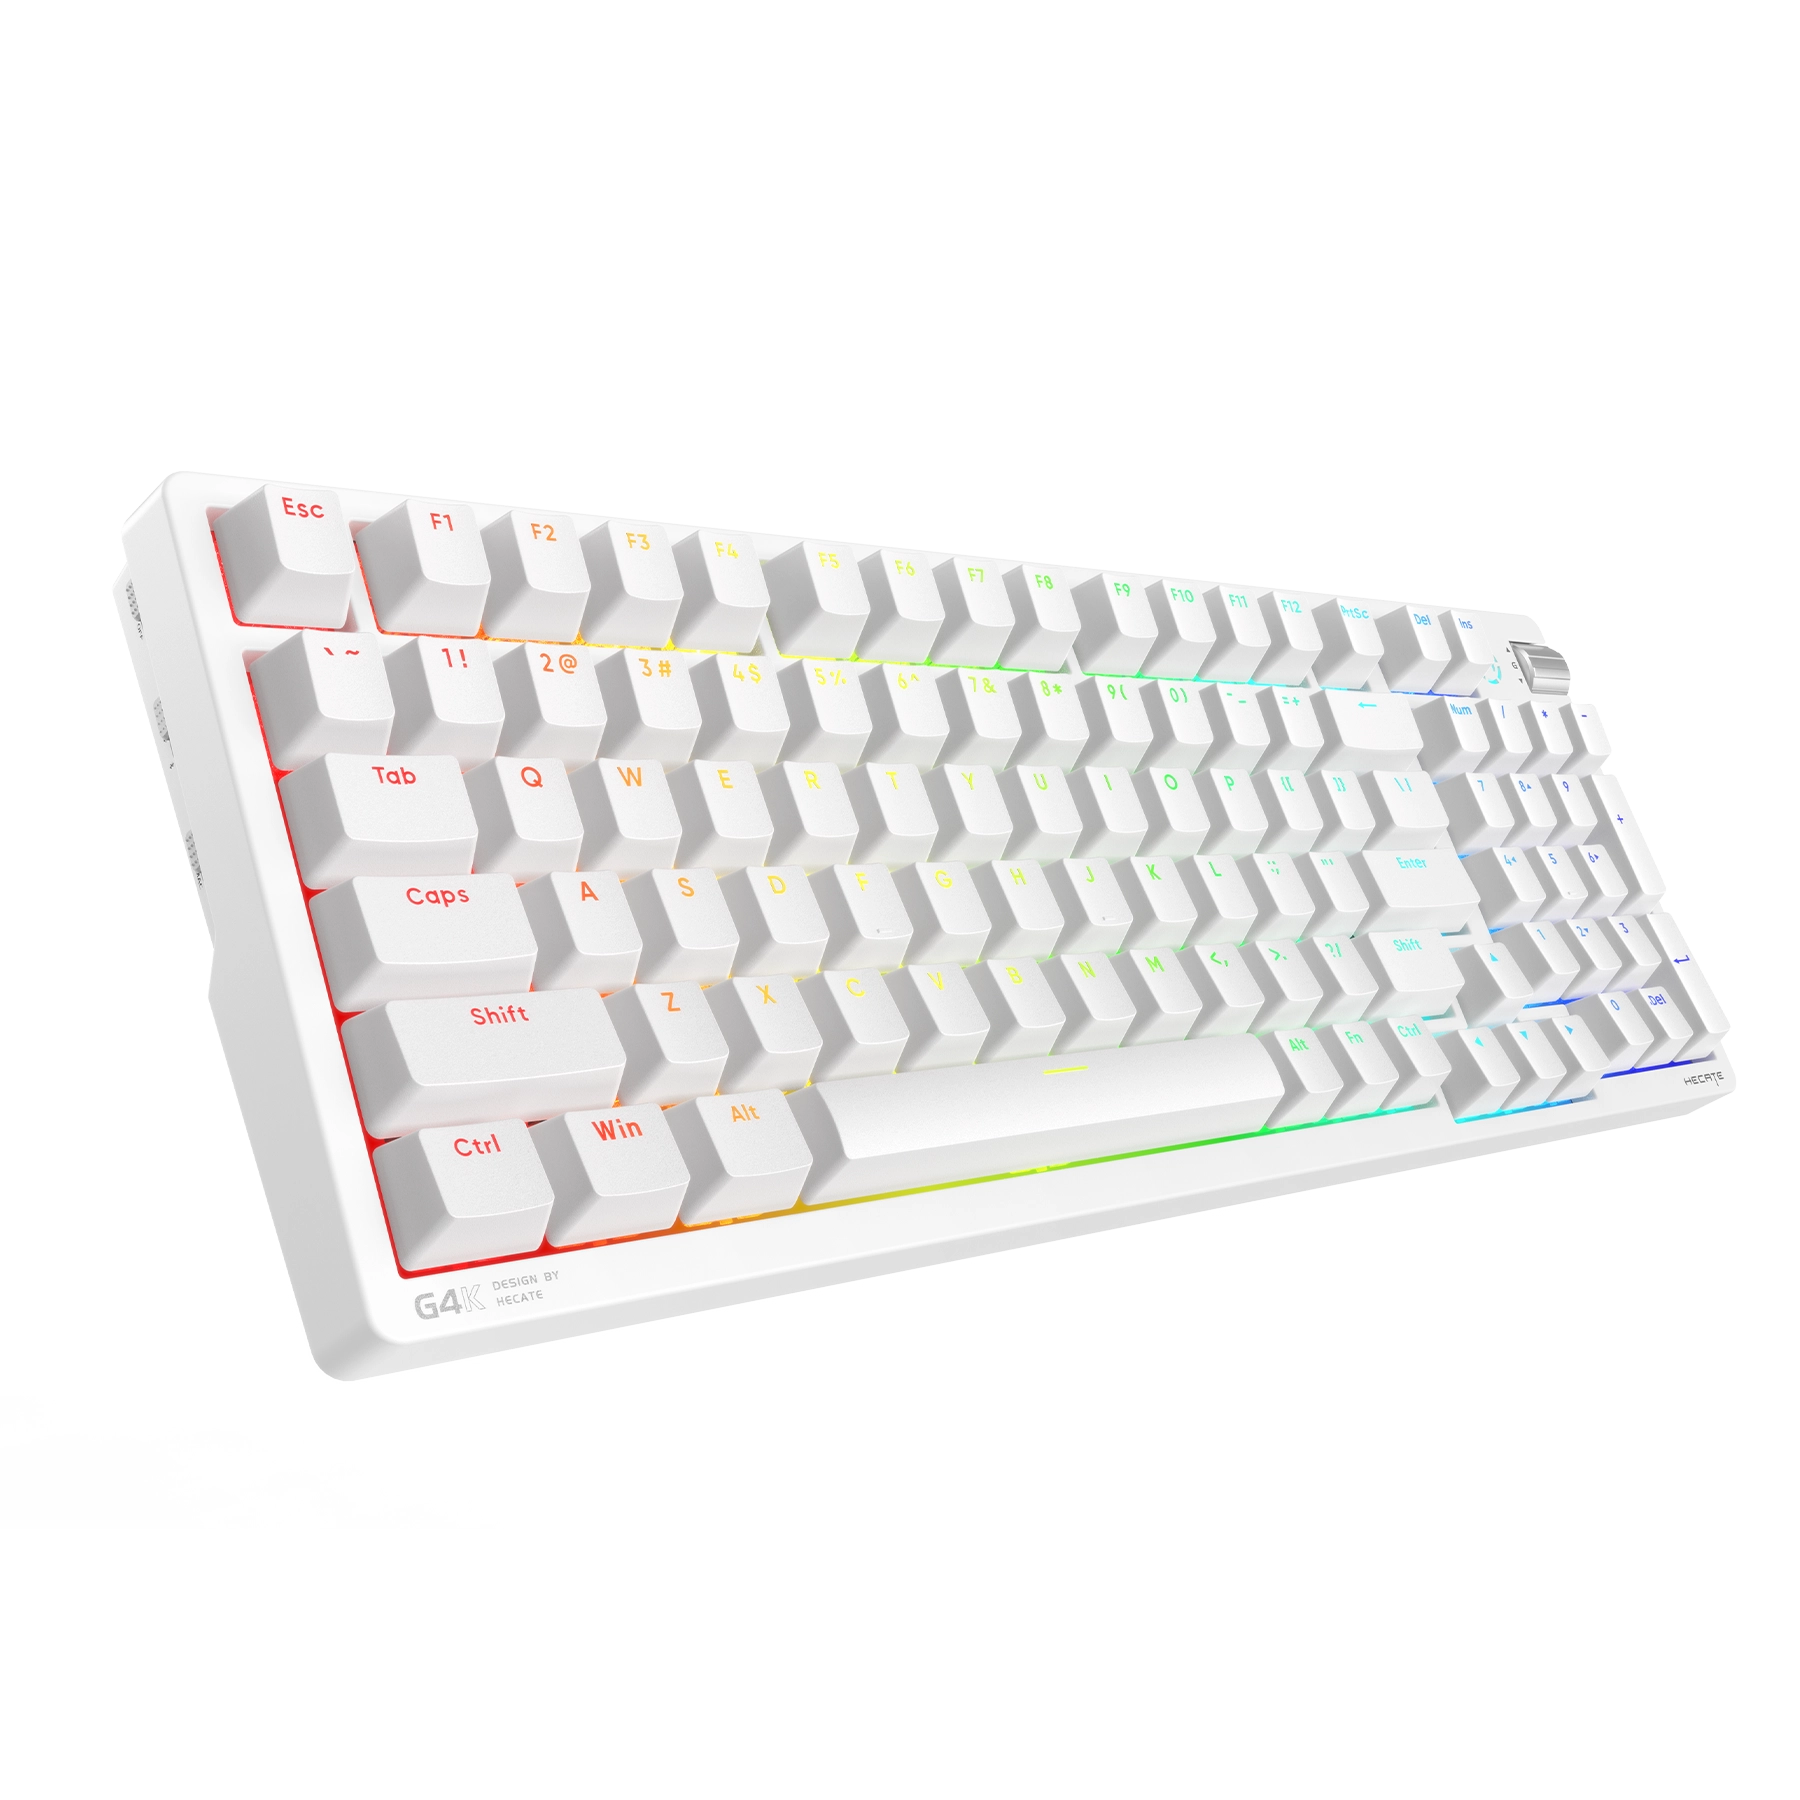 G4K keyboard product pictures white_